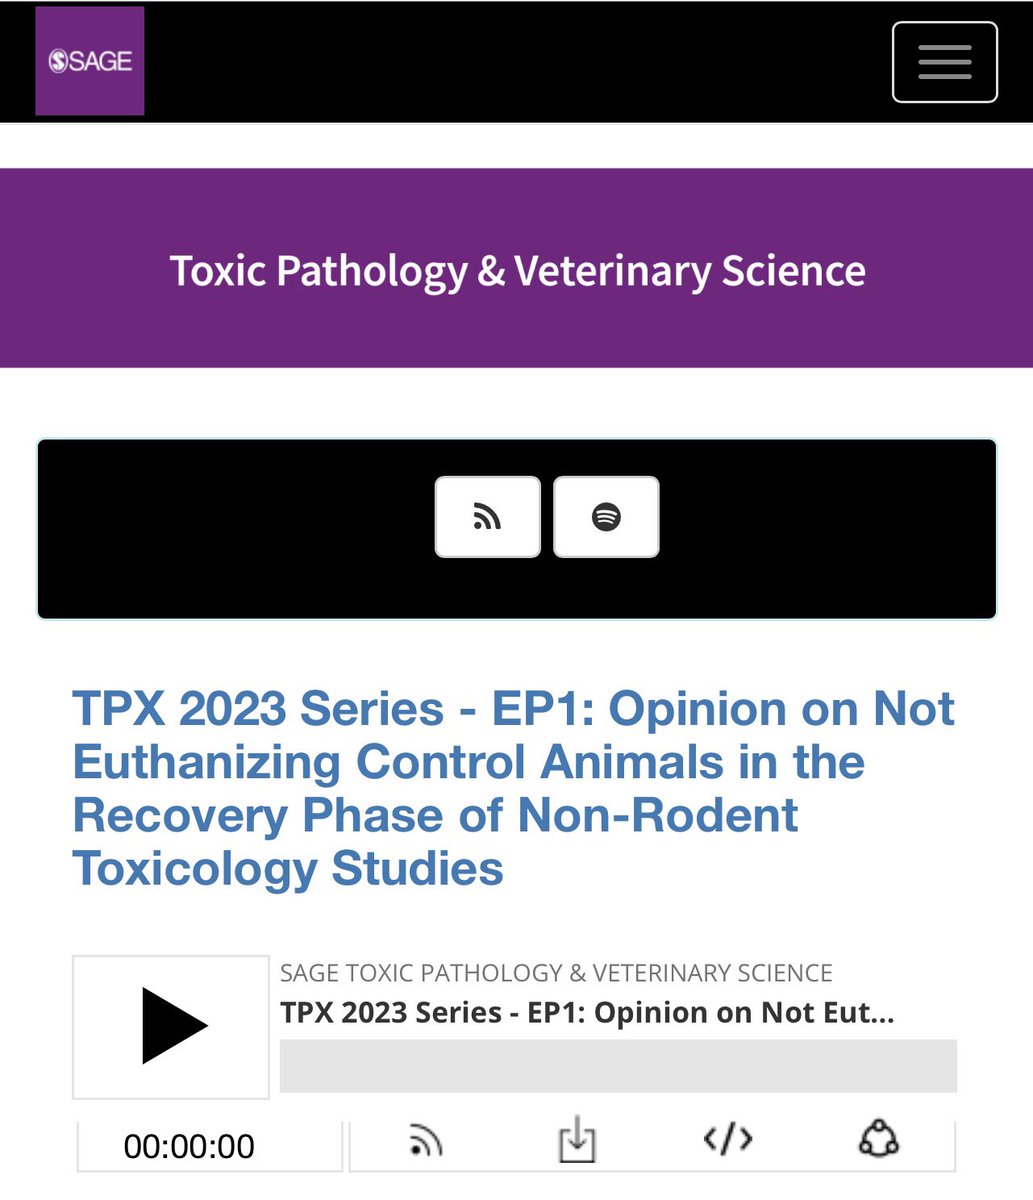 Good morning, @SageJournals, we’re “toxicologic” not “toxic”!